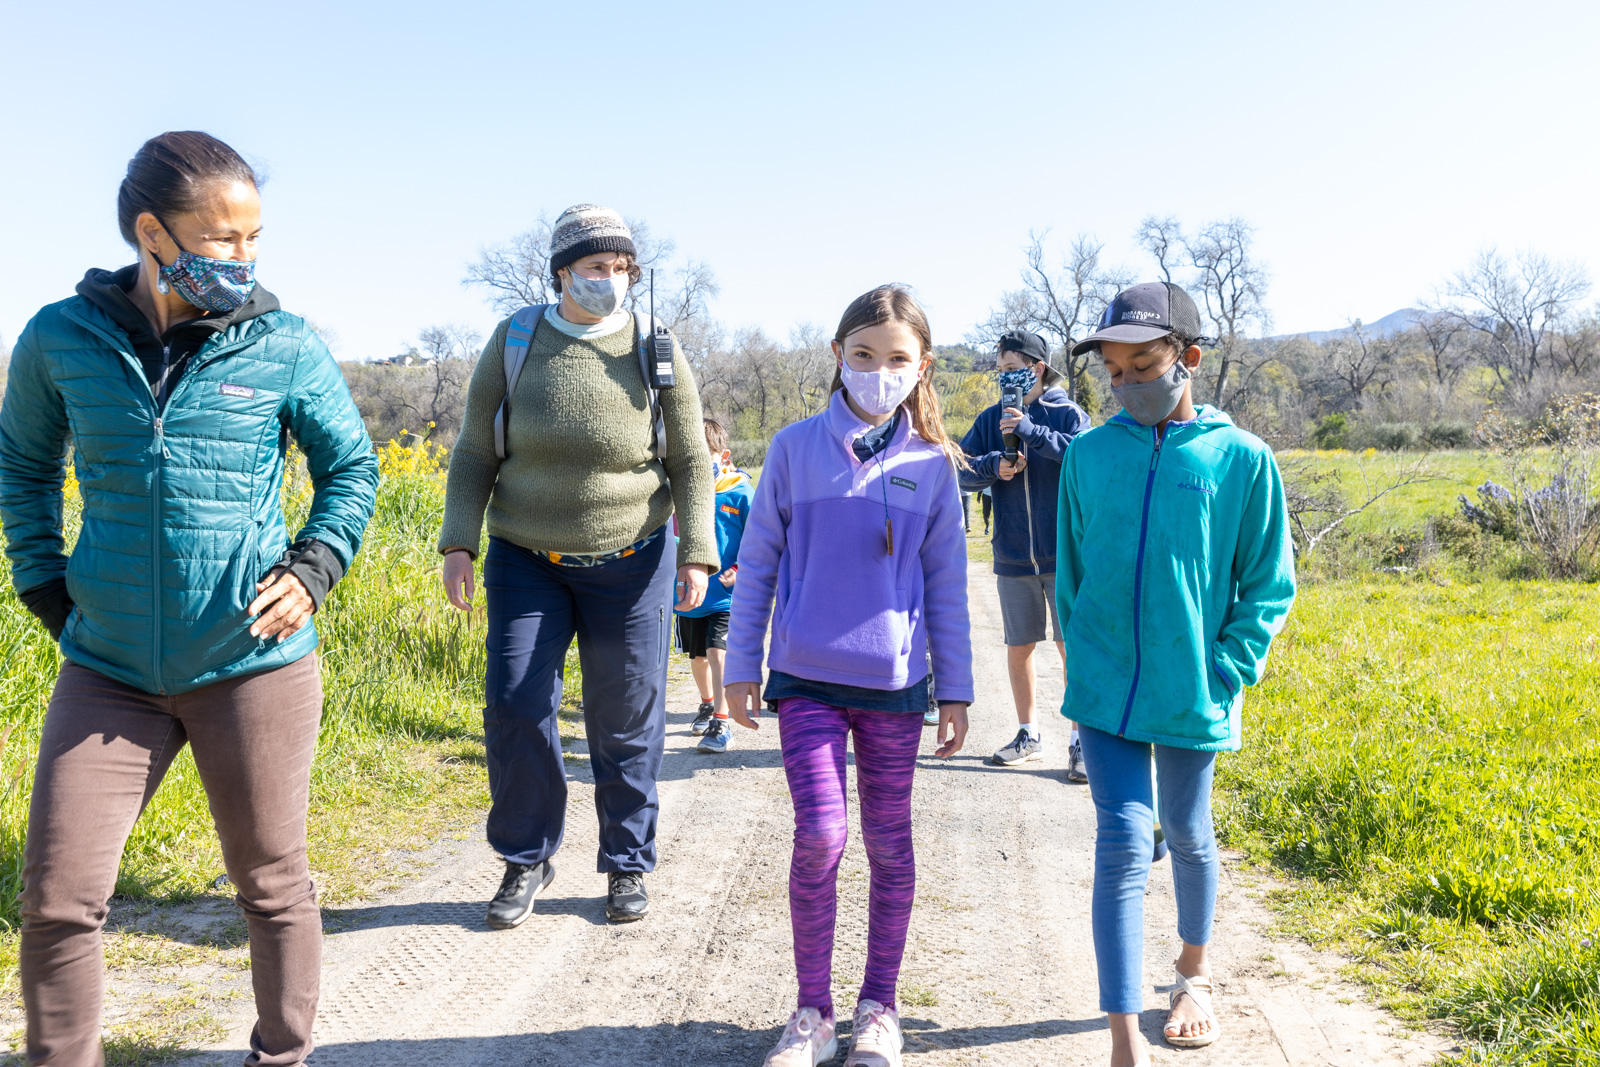 Camp goers and leaders wearing face masks and walking down a dirt road path.